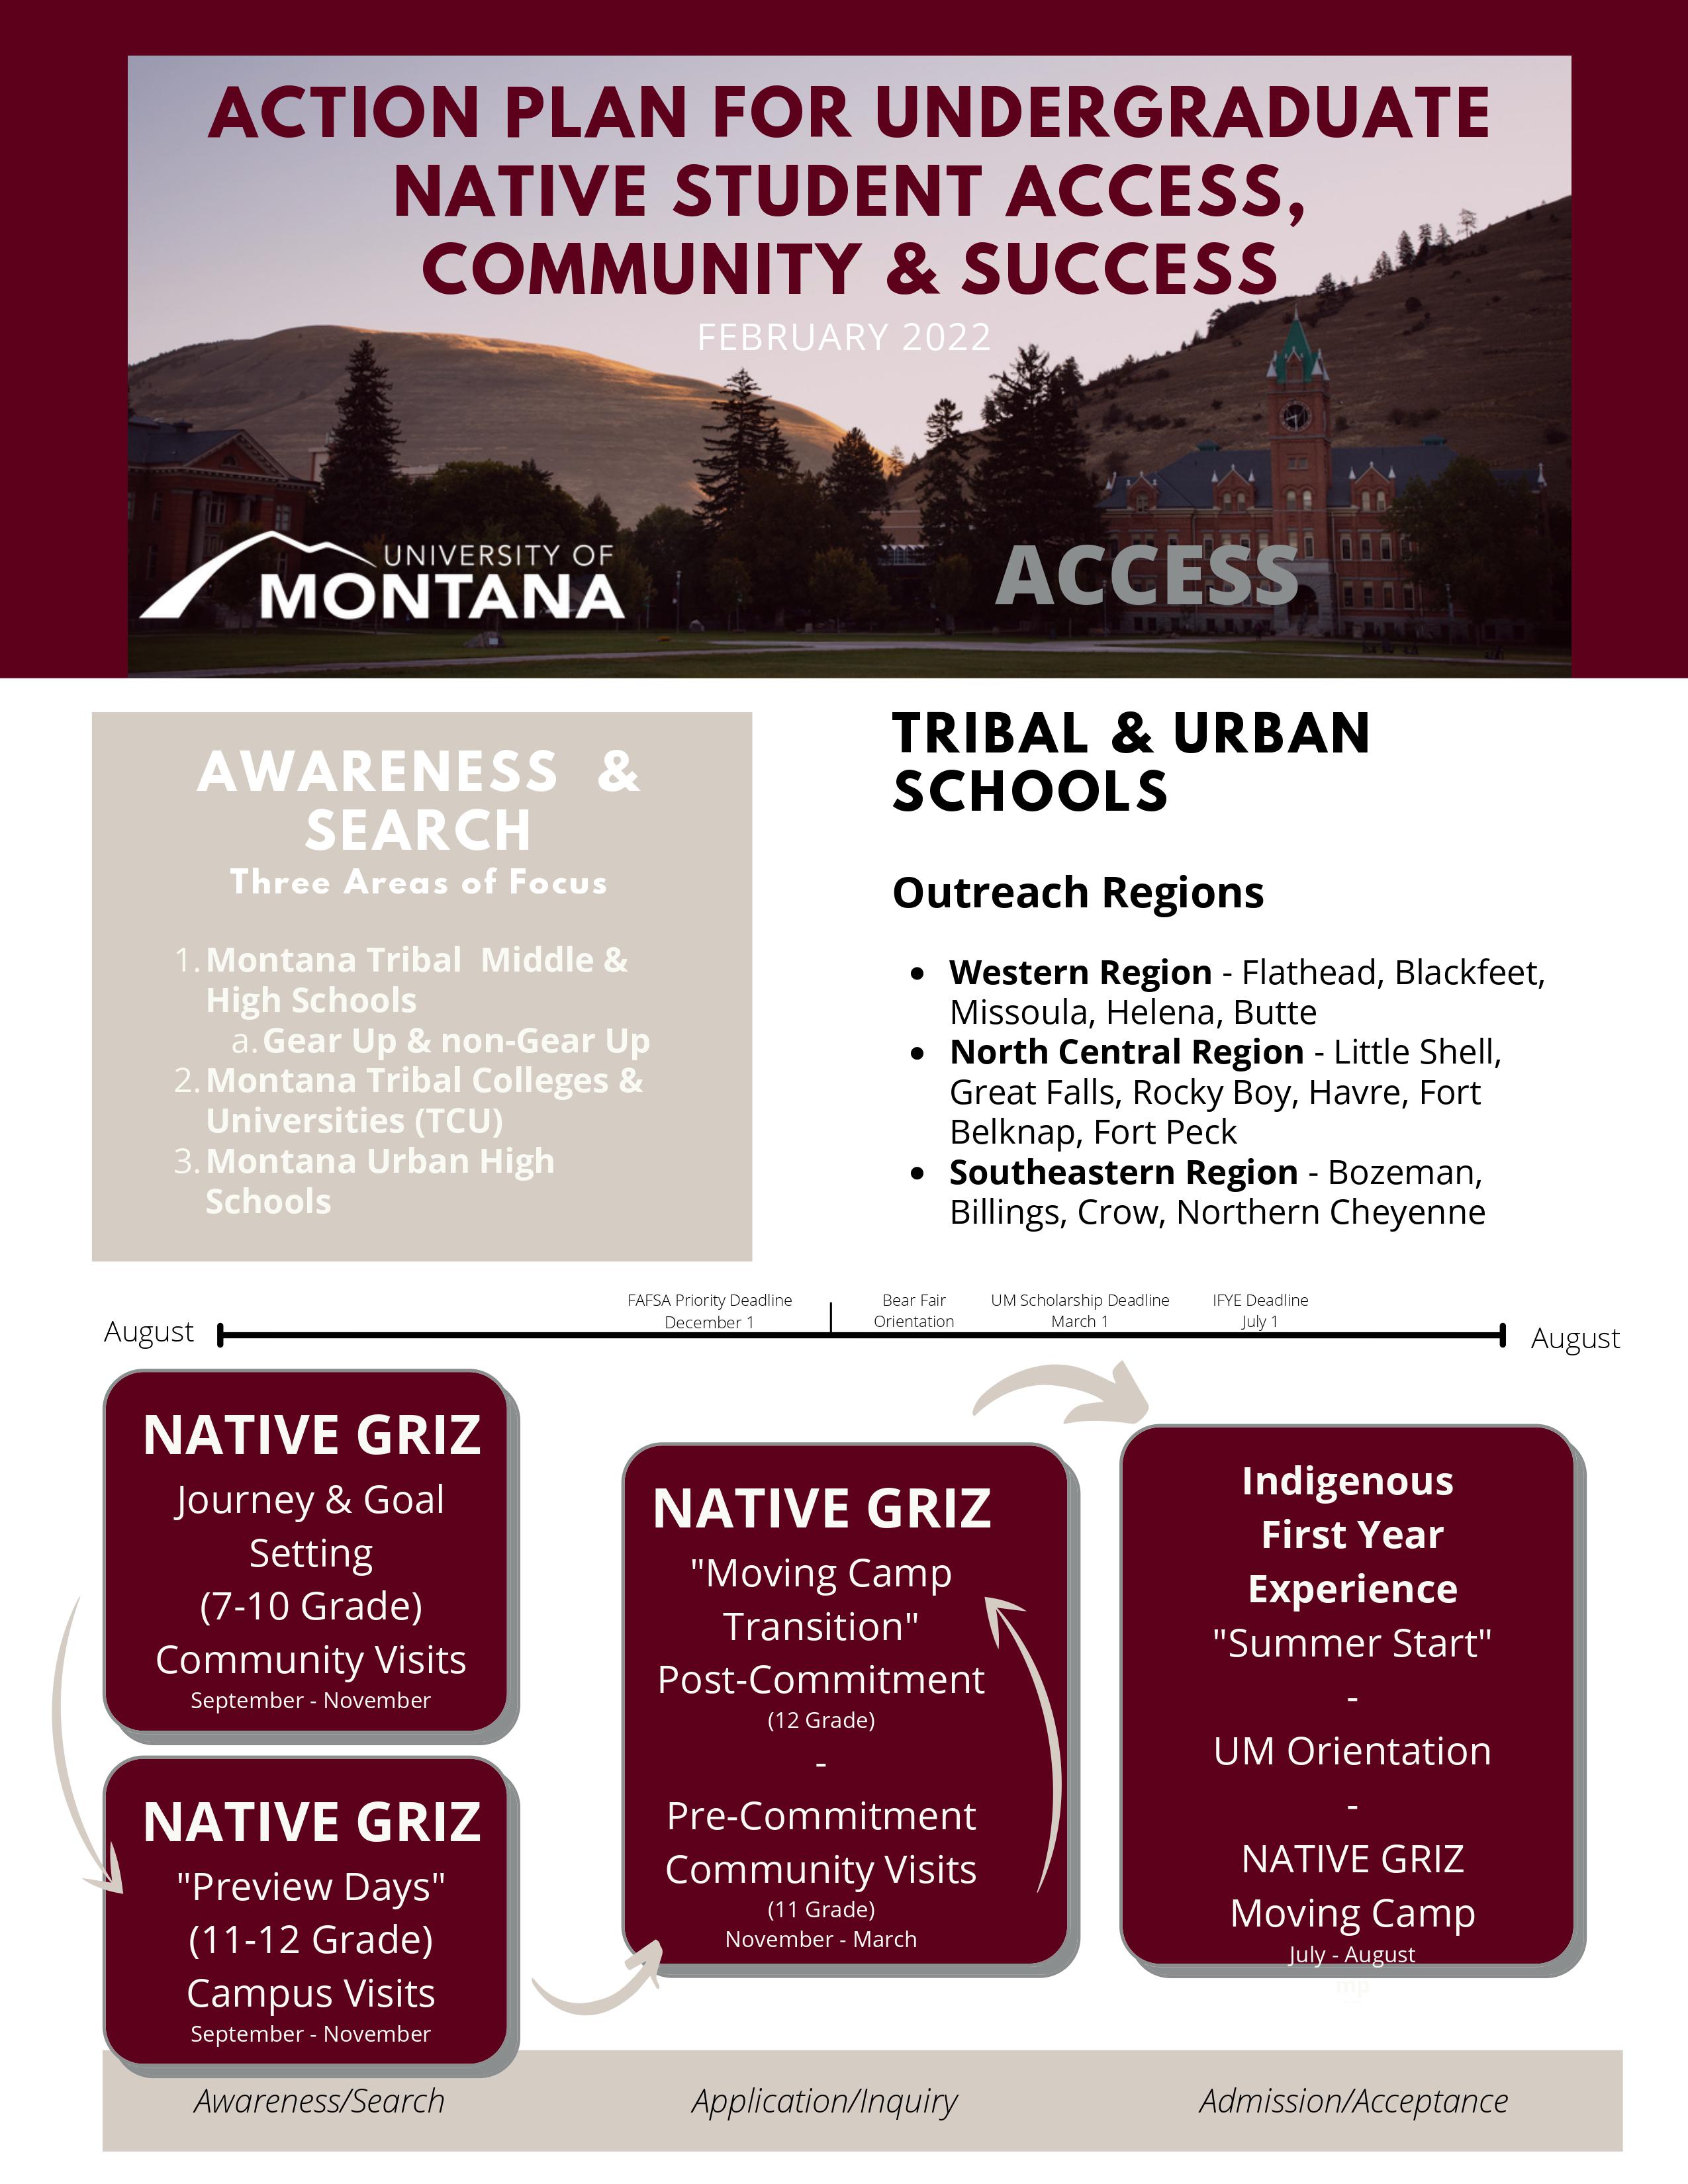 Action plan for undergraduate native student access, community and success. 